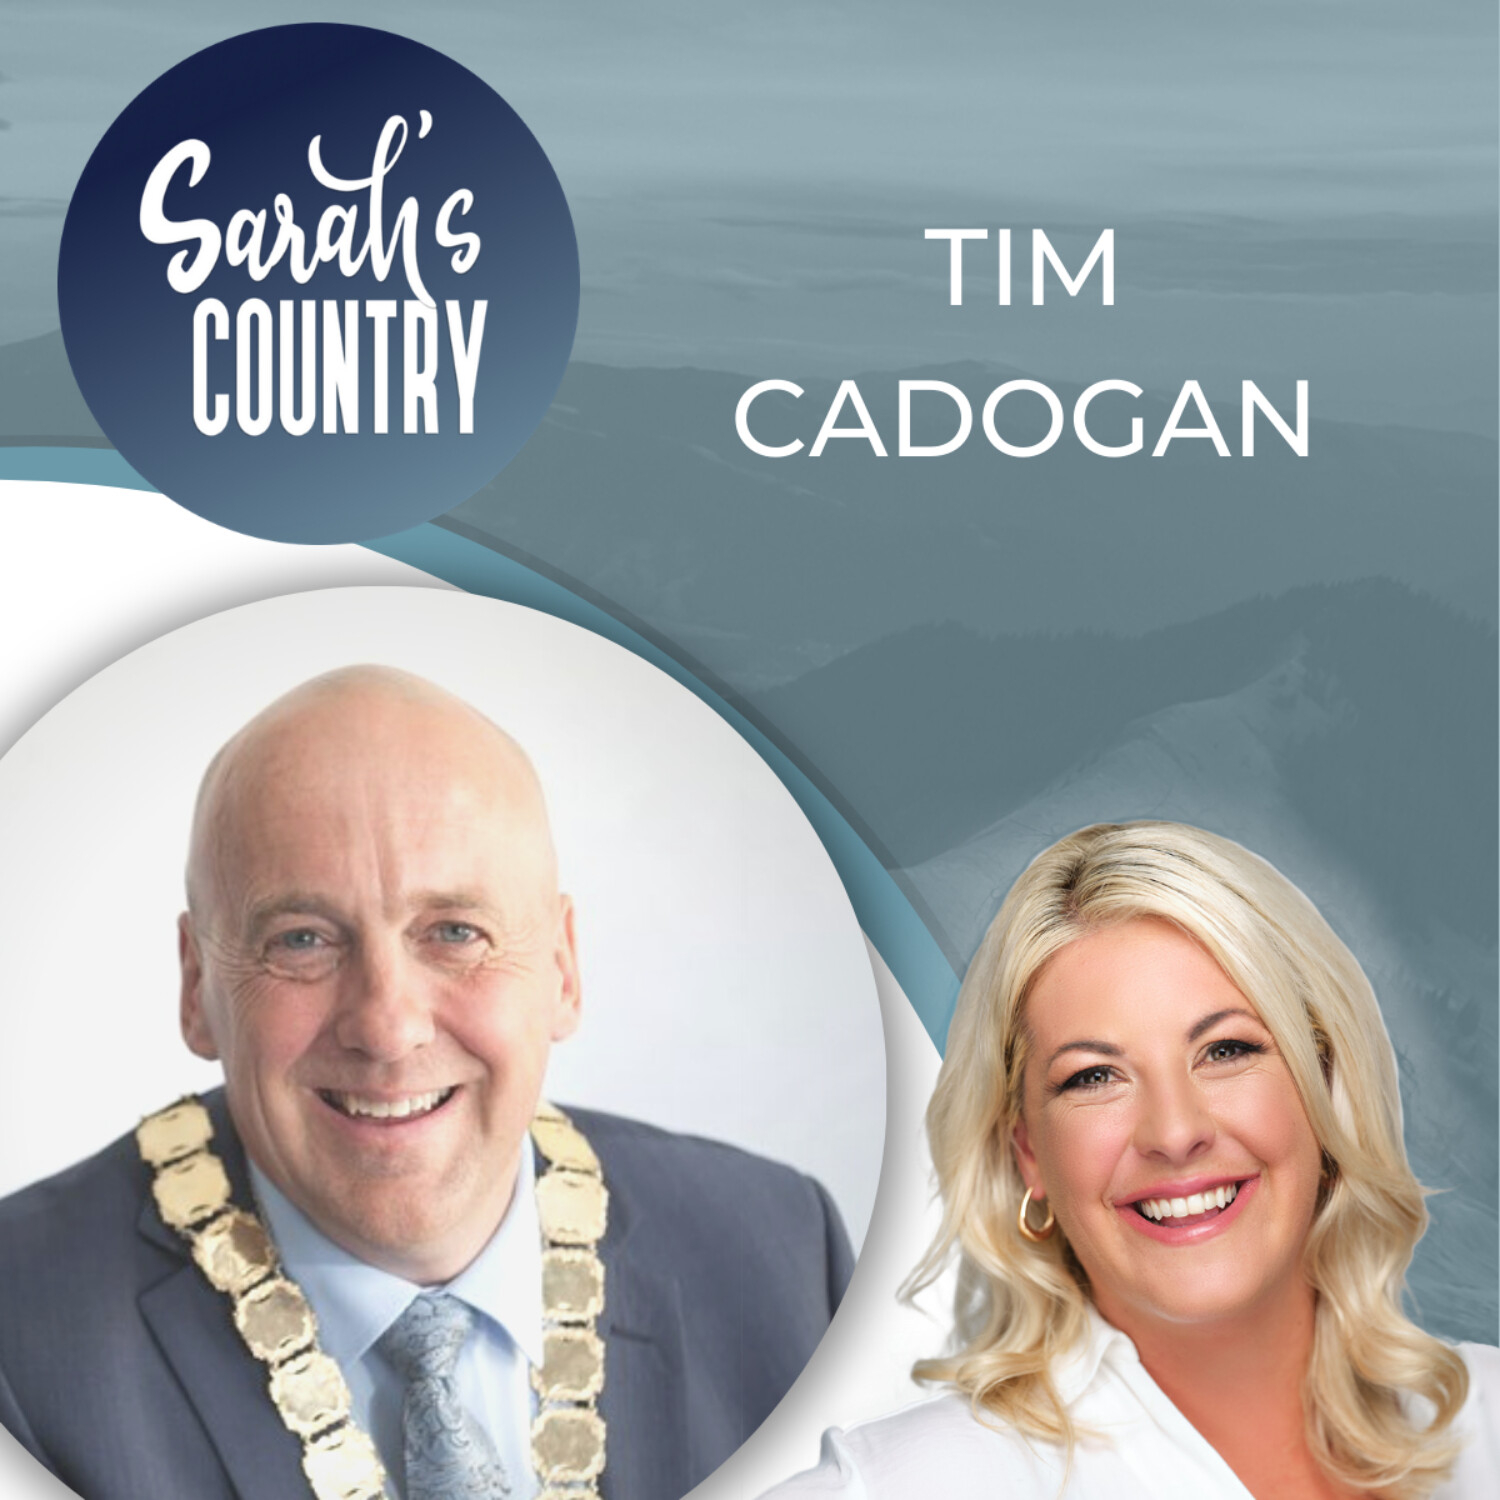 “Mayor to spend holiday in packhouse” with Tim Cadogan